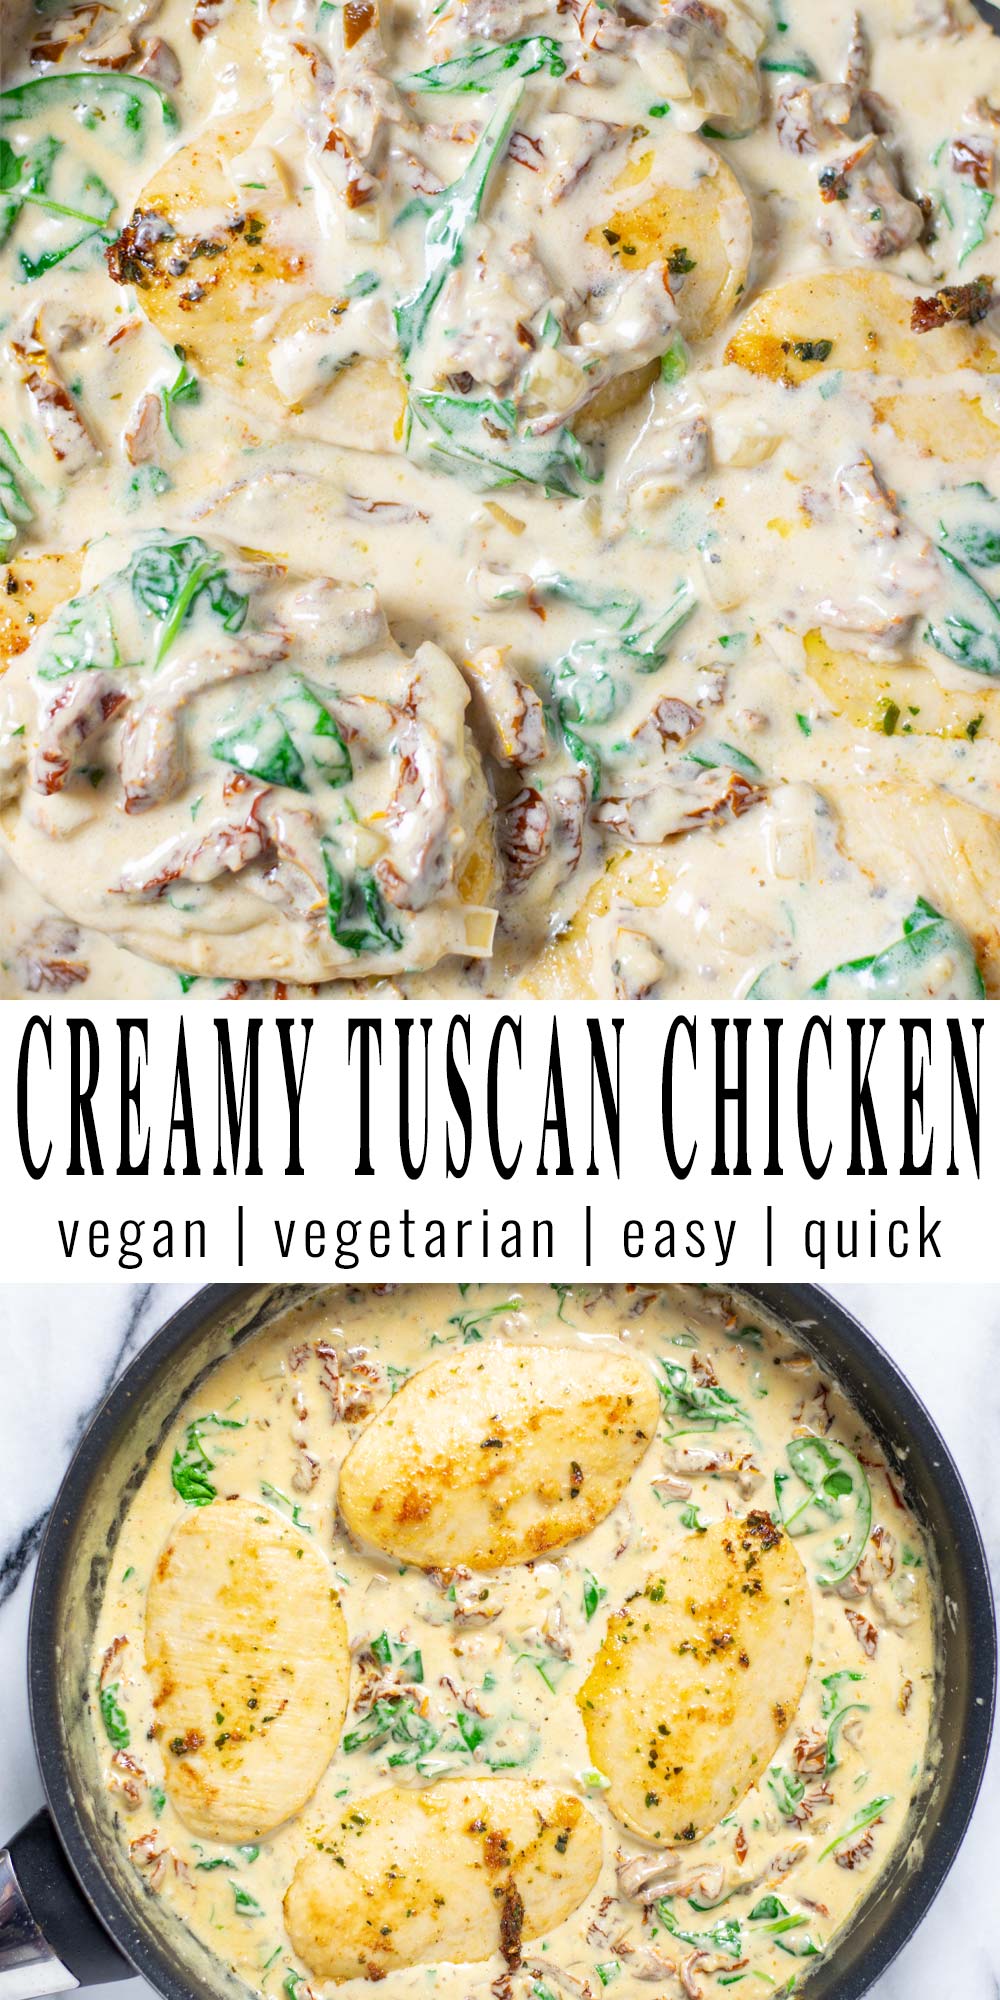 Collage of two pictures of the Creamy Tuscan Chicken with recipe title text.